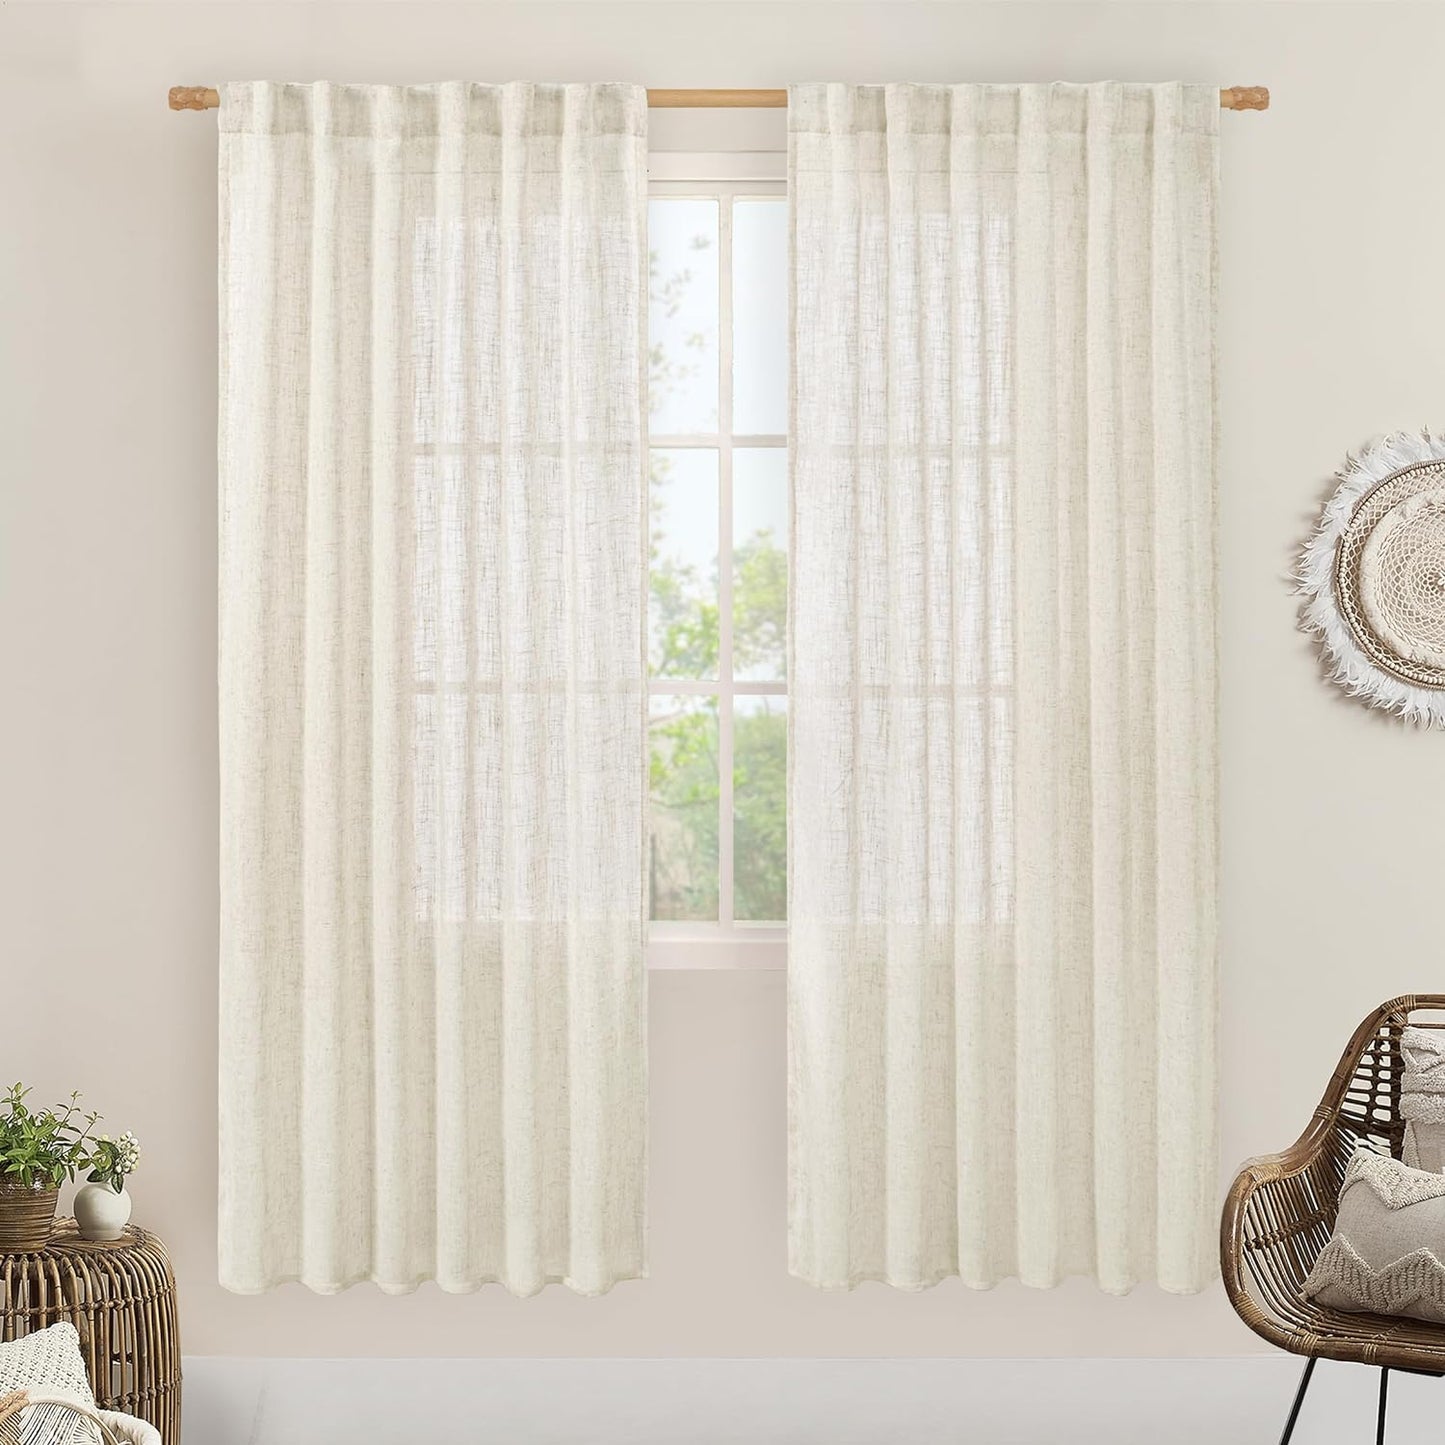 LAMIT Natural Linen Blended Curtains for Living Room, Back Tab and Rod Pocket Semi Sheer Curtains Light Filtering Country Rustic Drapes for Bedroom/Farmhouse, 2 Panels,52 X 108 Inch, Linen  LAMIT Natural 52W X 78L 